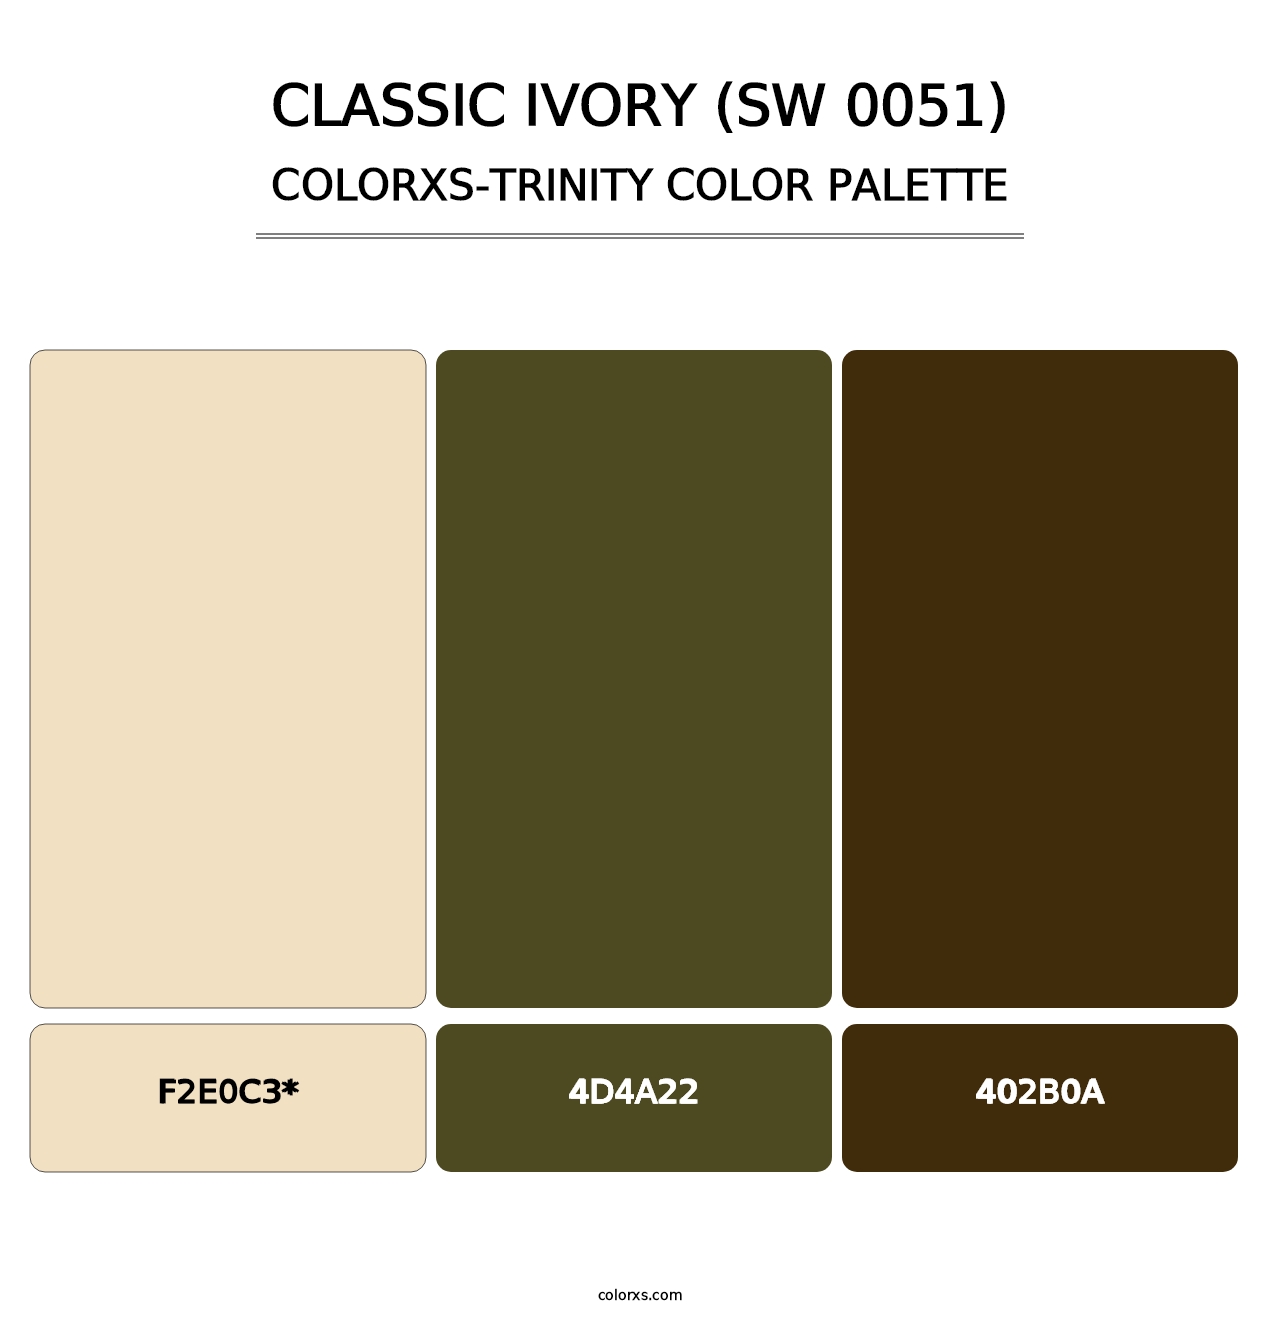 Classic Ivory (SW 0051) - Colorxs Trinity Palette